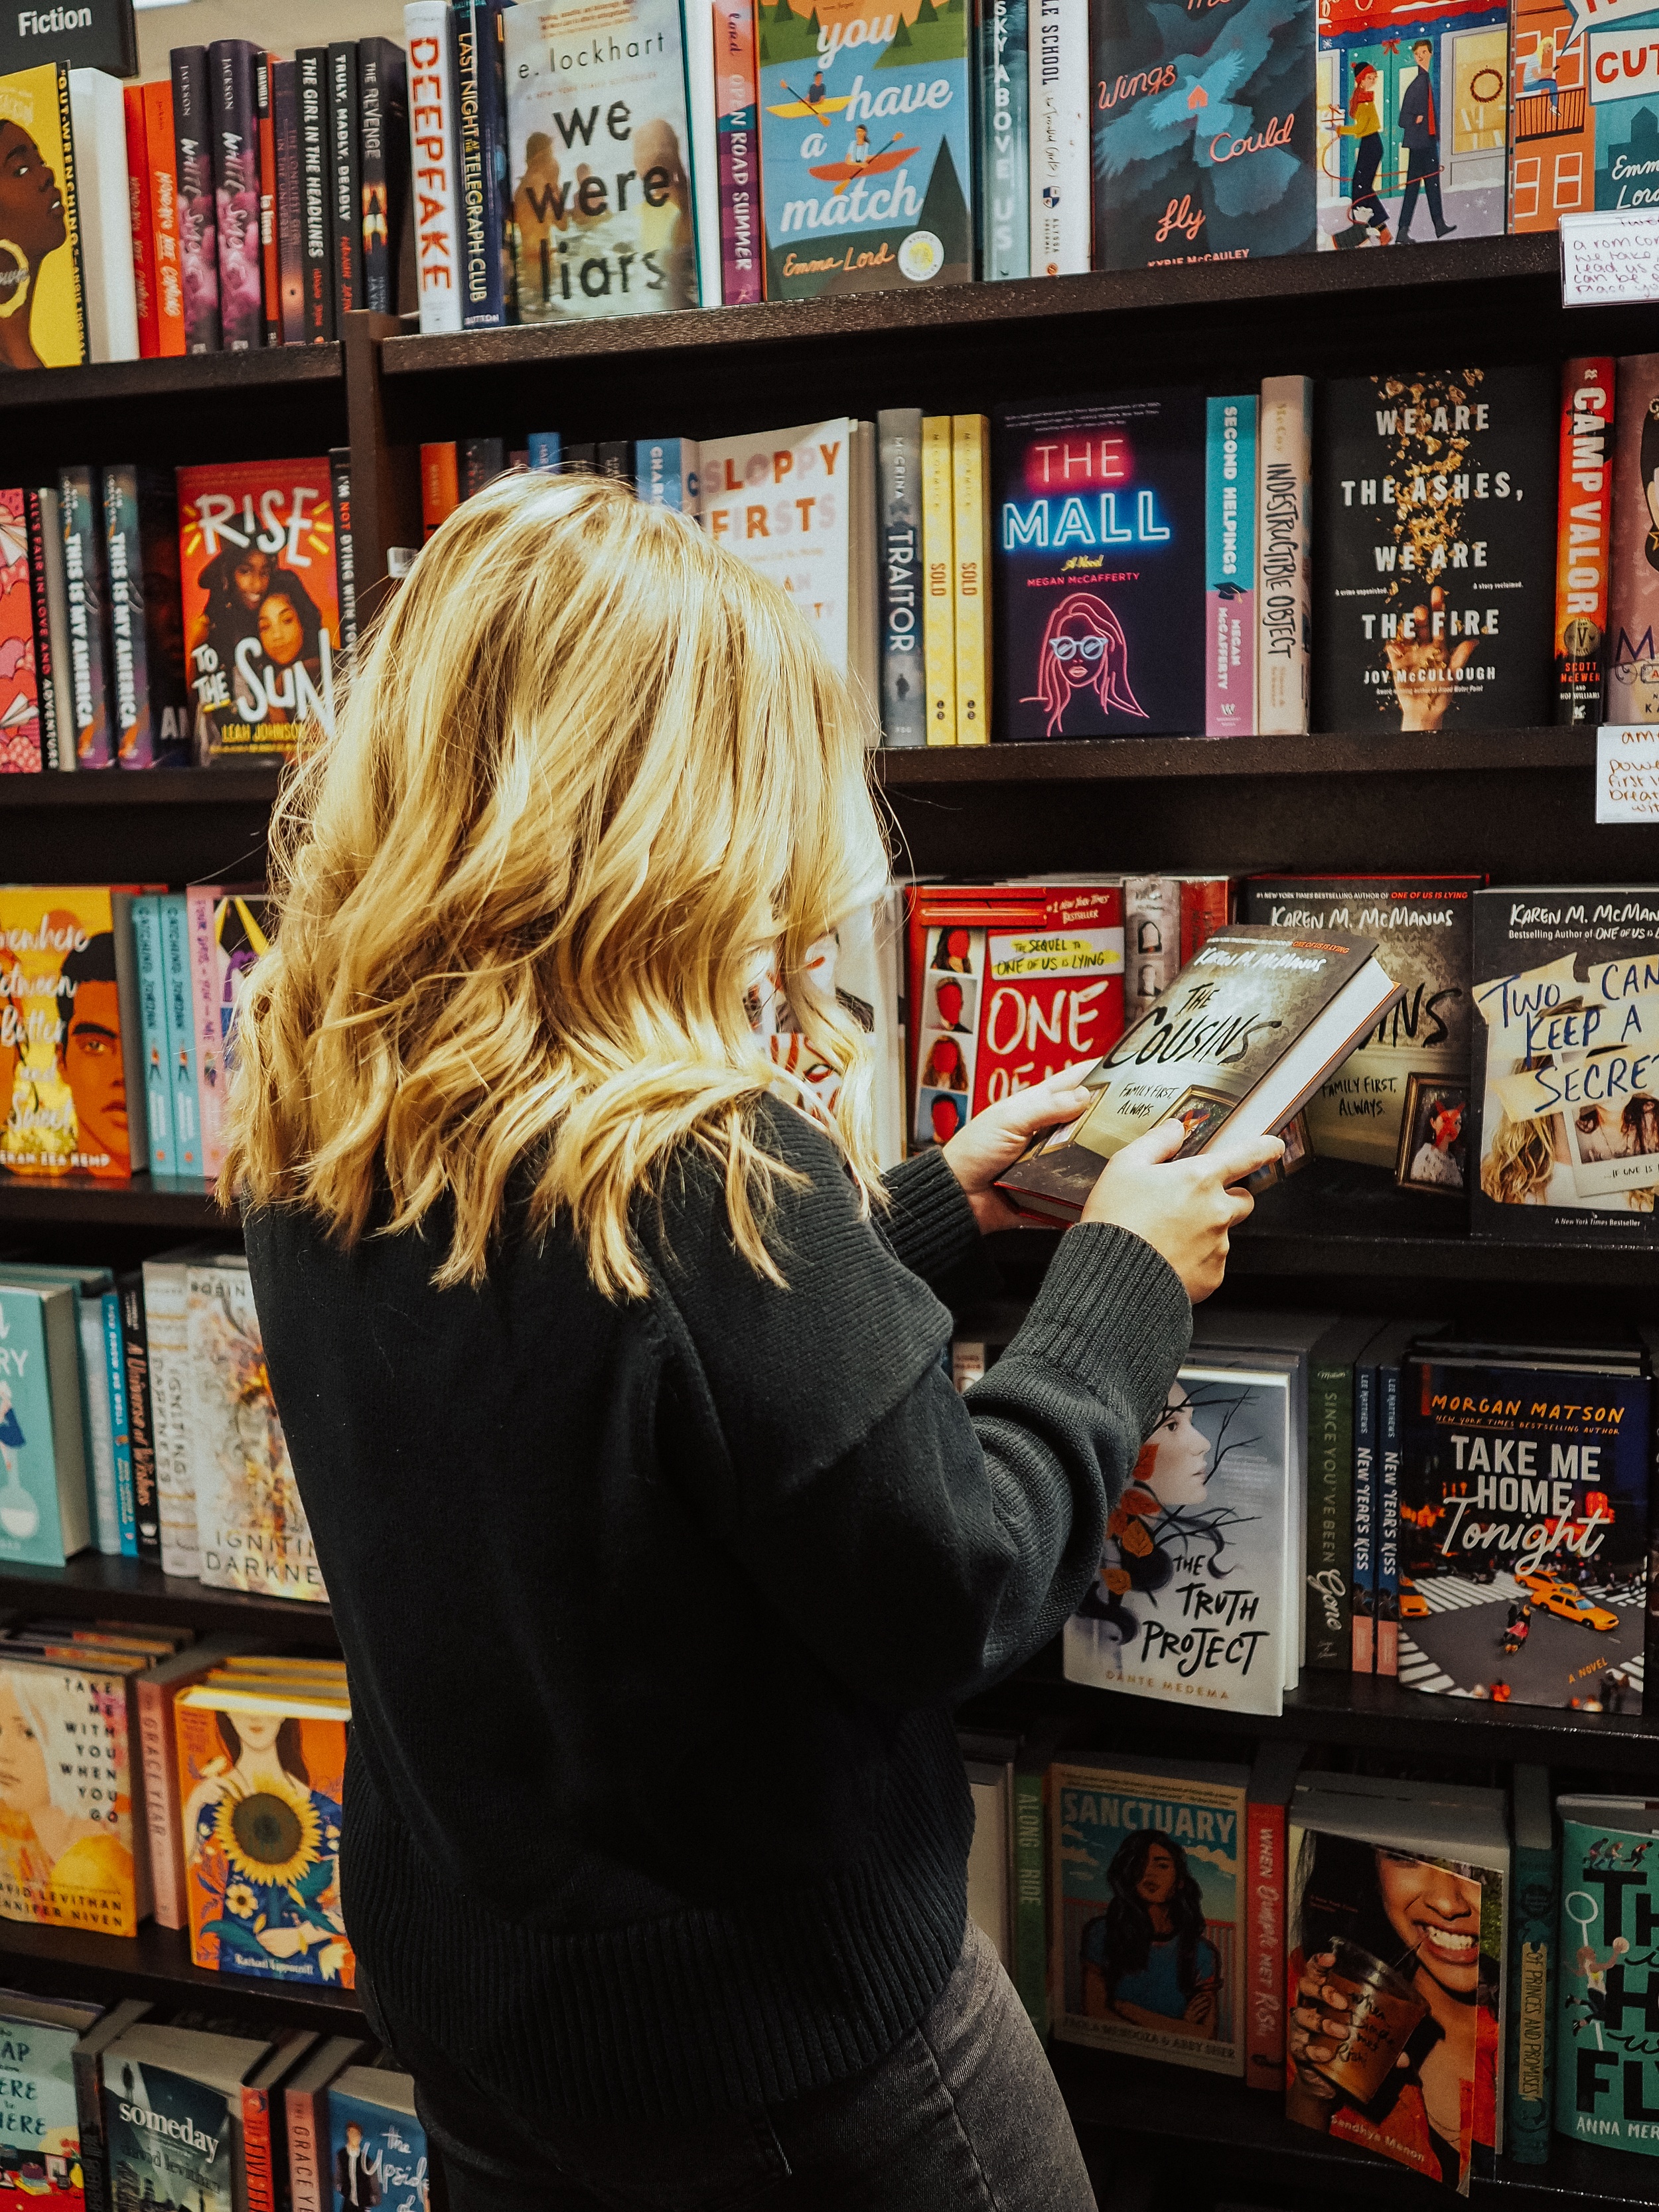 Crush your reading goals by starting your own online book club! Follow these tips to make sure your book club goes off without a hitch.